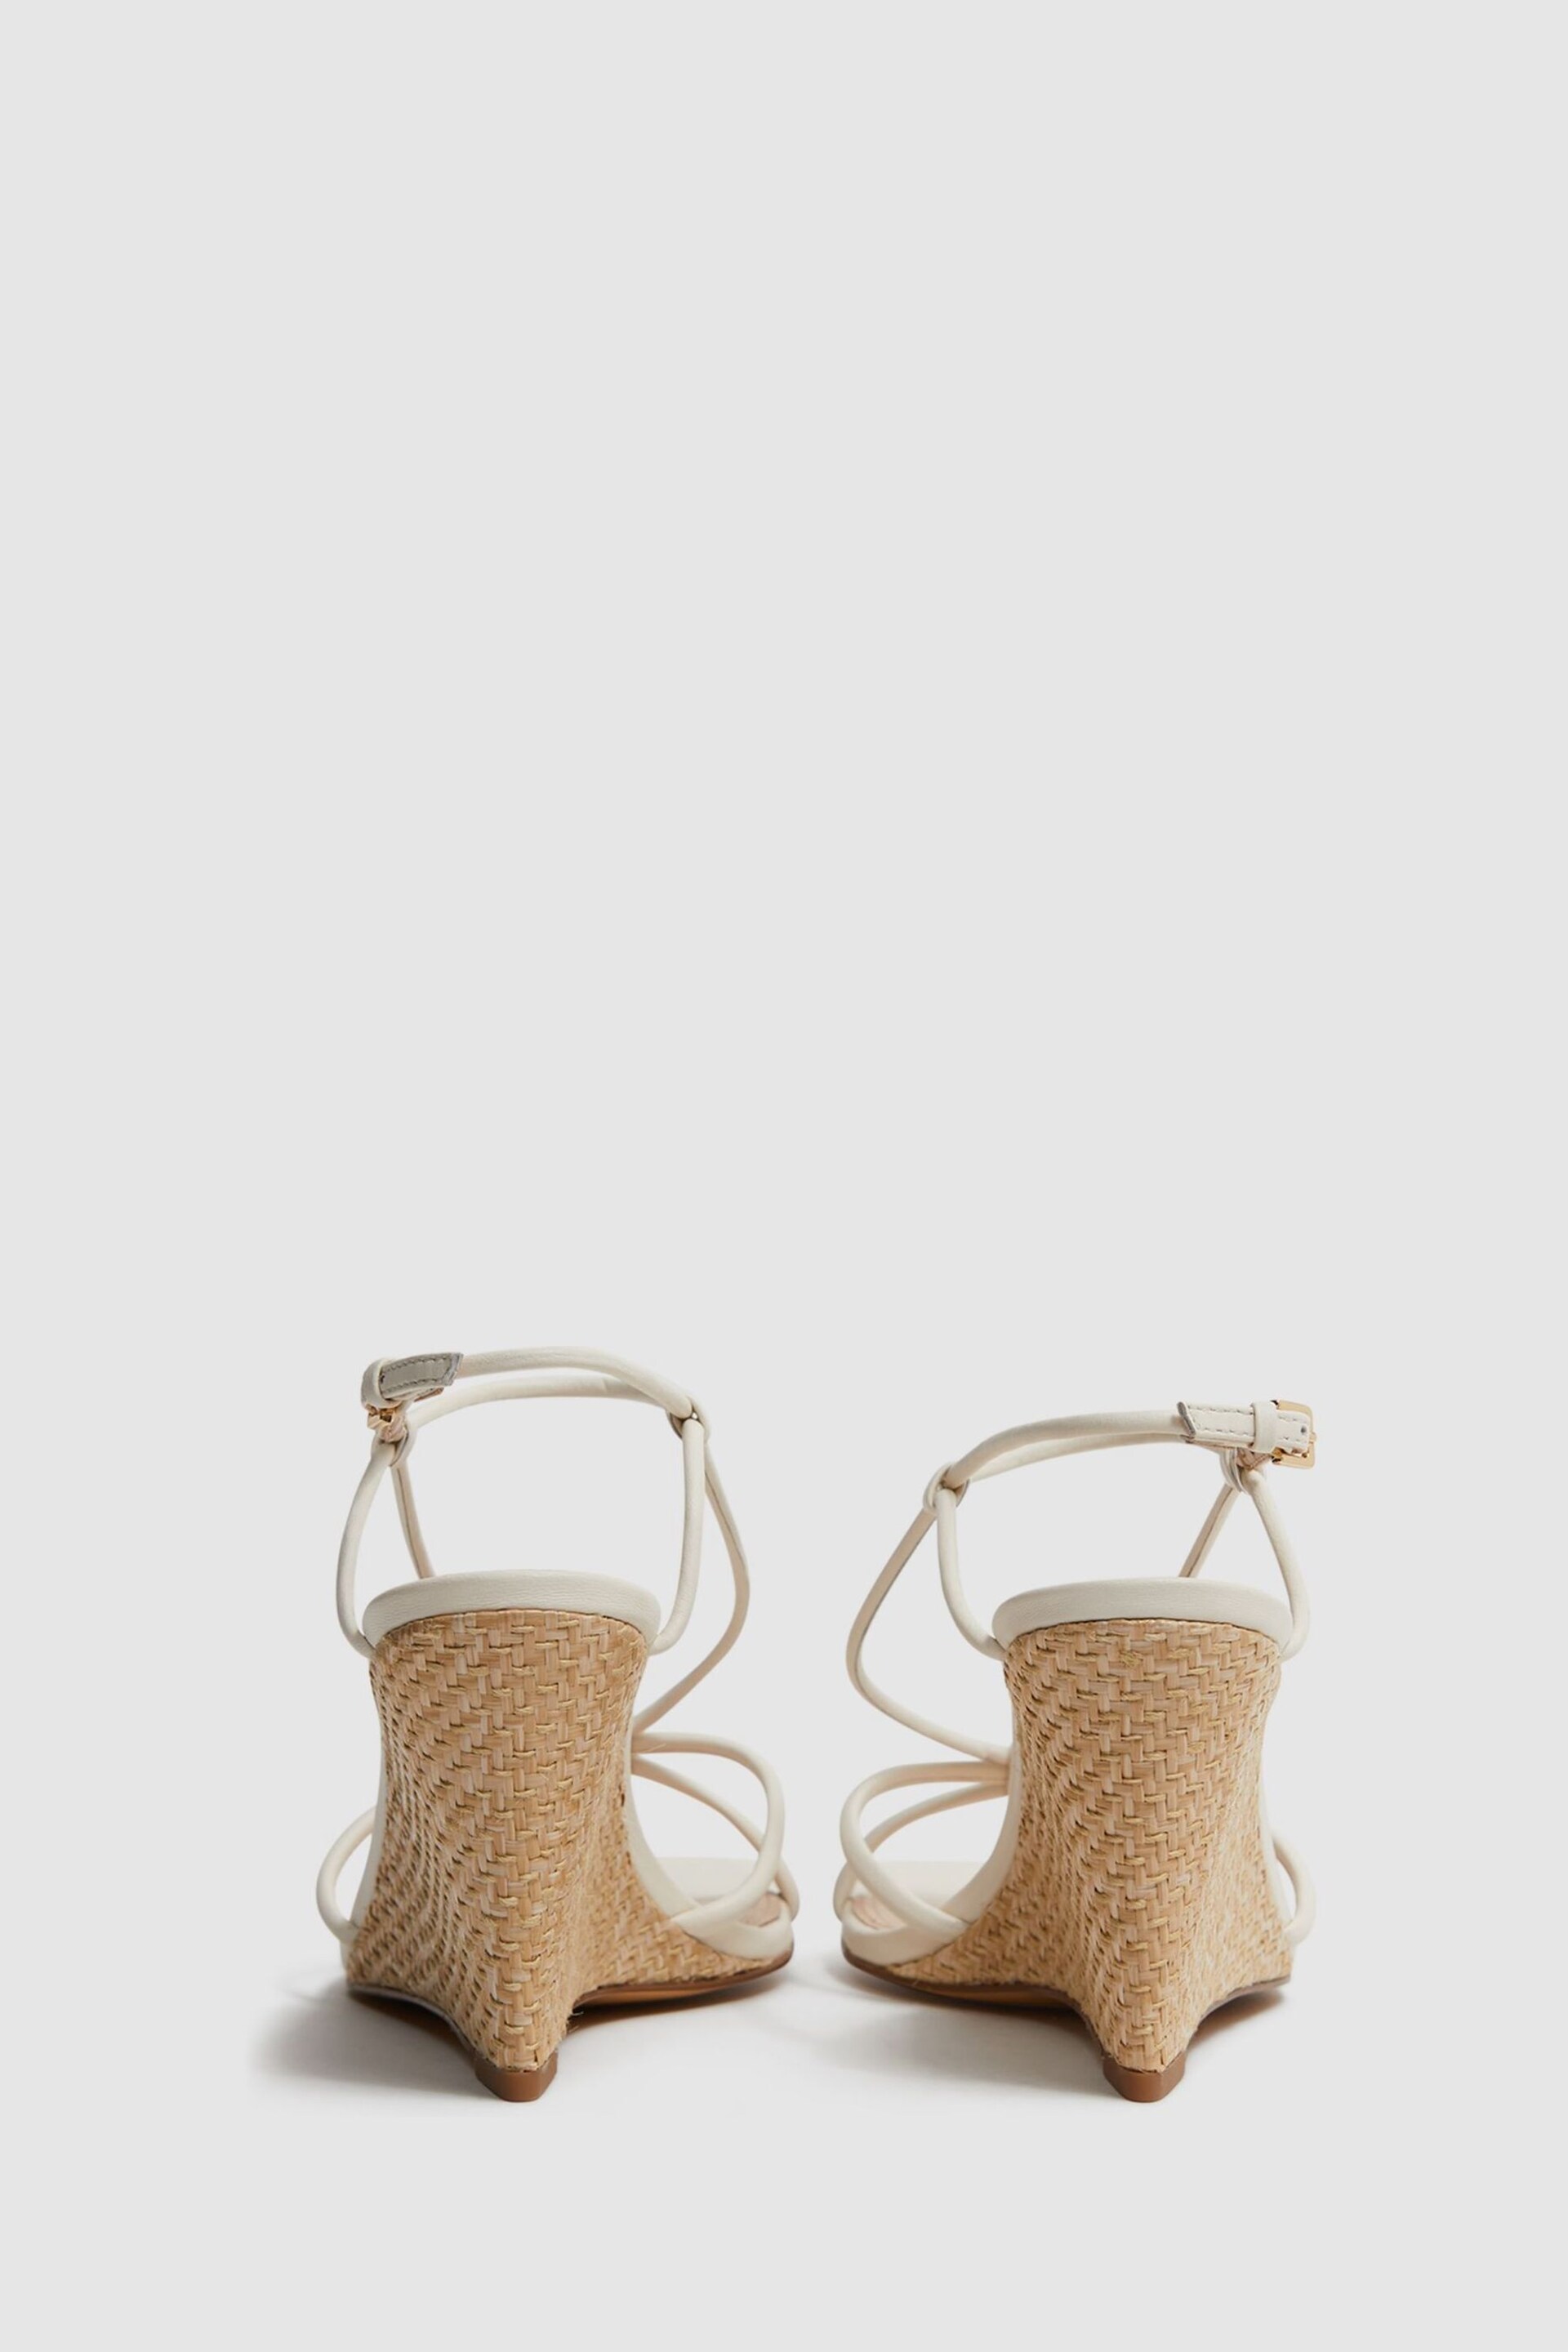 Reiss Off White Daisey Strappy Wedge Heels - Image 4 of 5